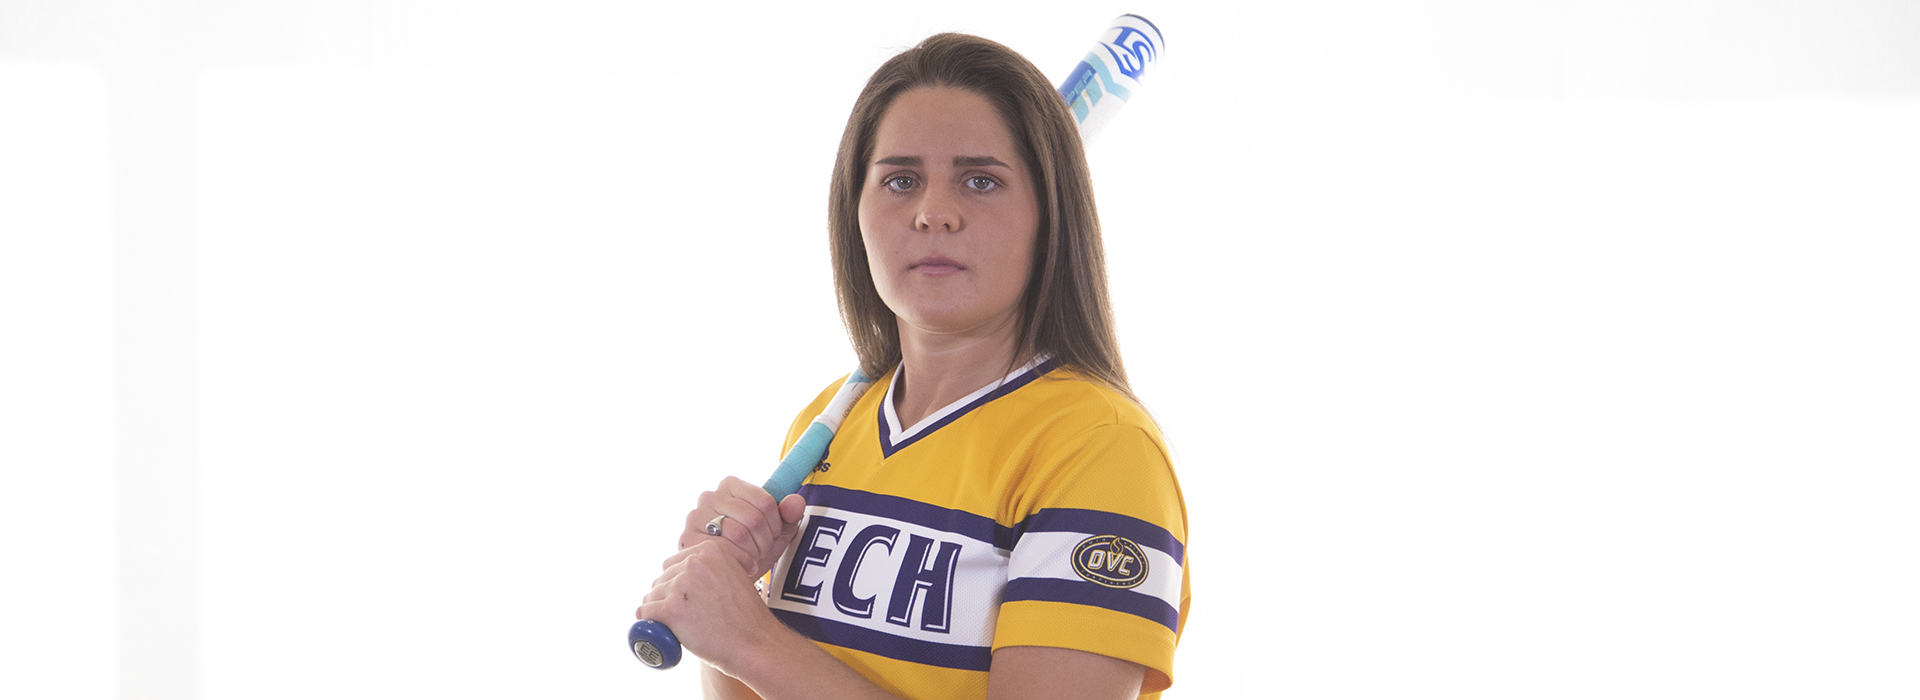 Tech softball opens 2021 campaign Friday at Stinger Classic